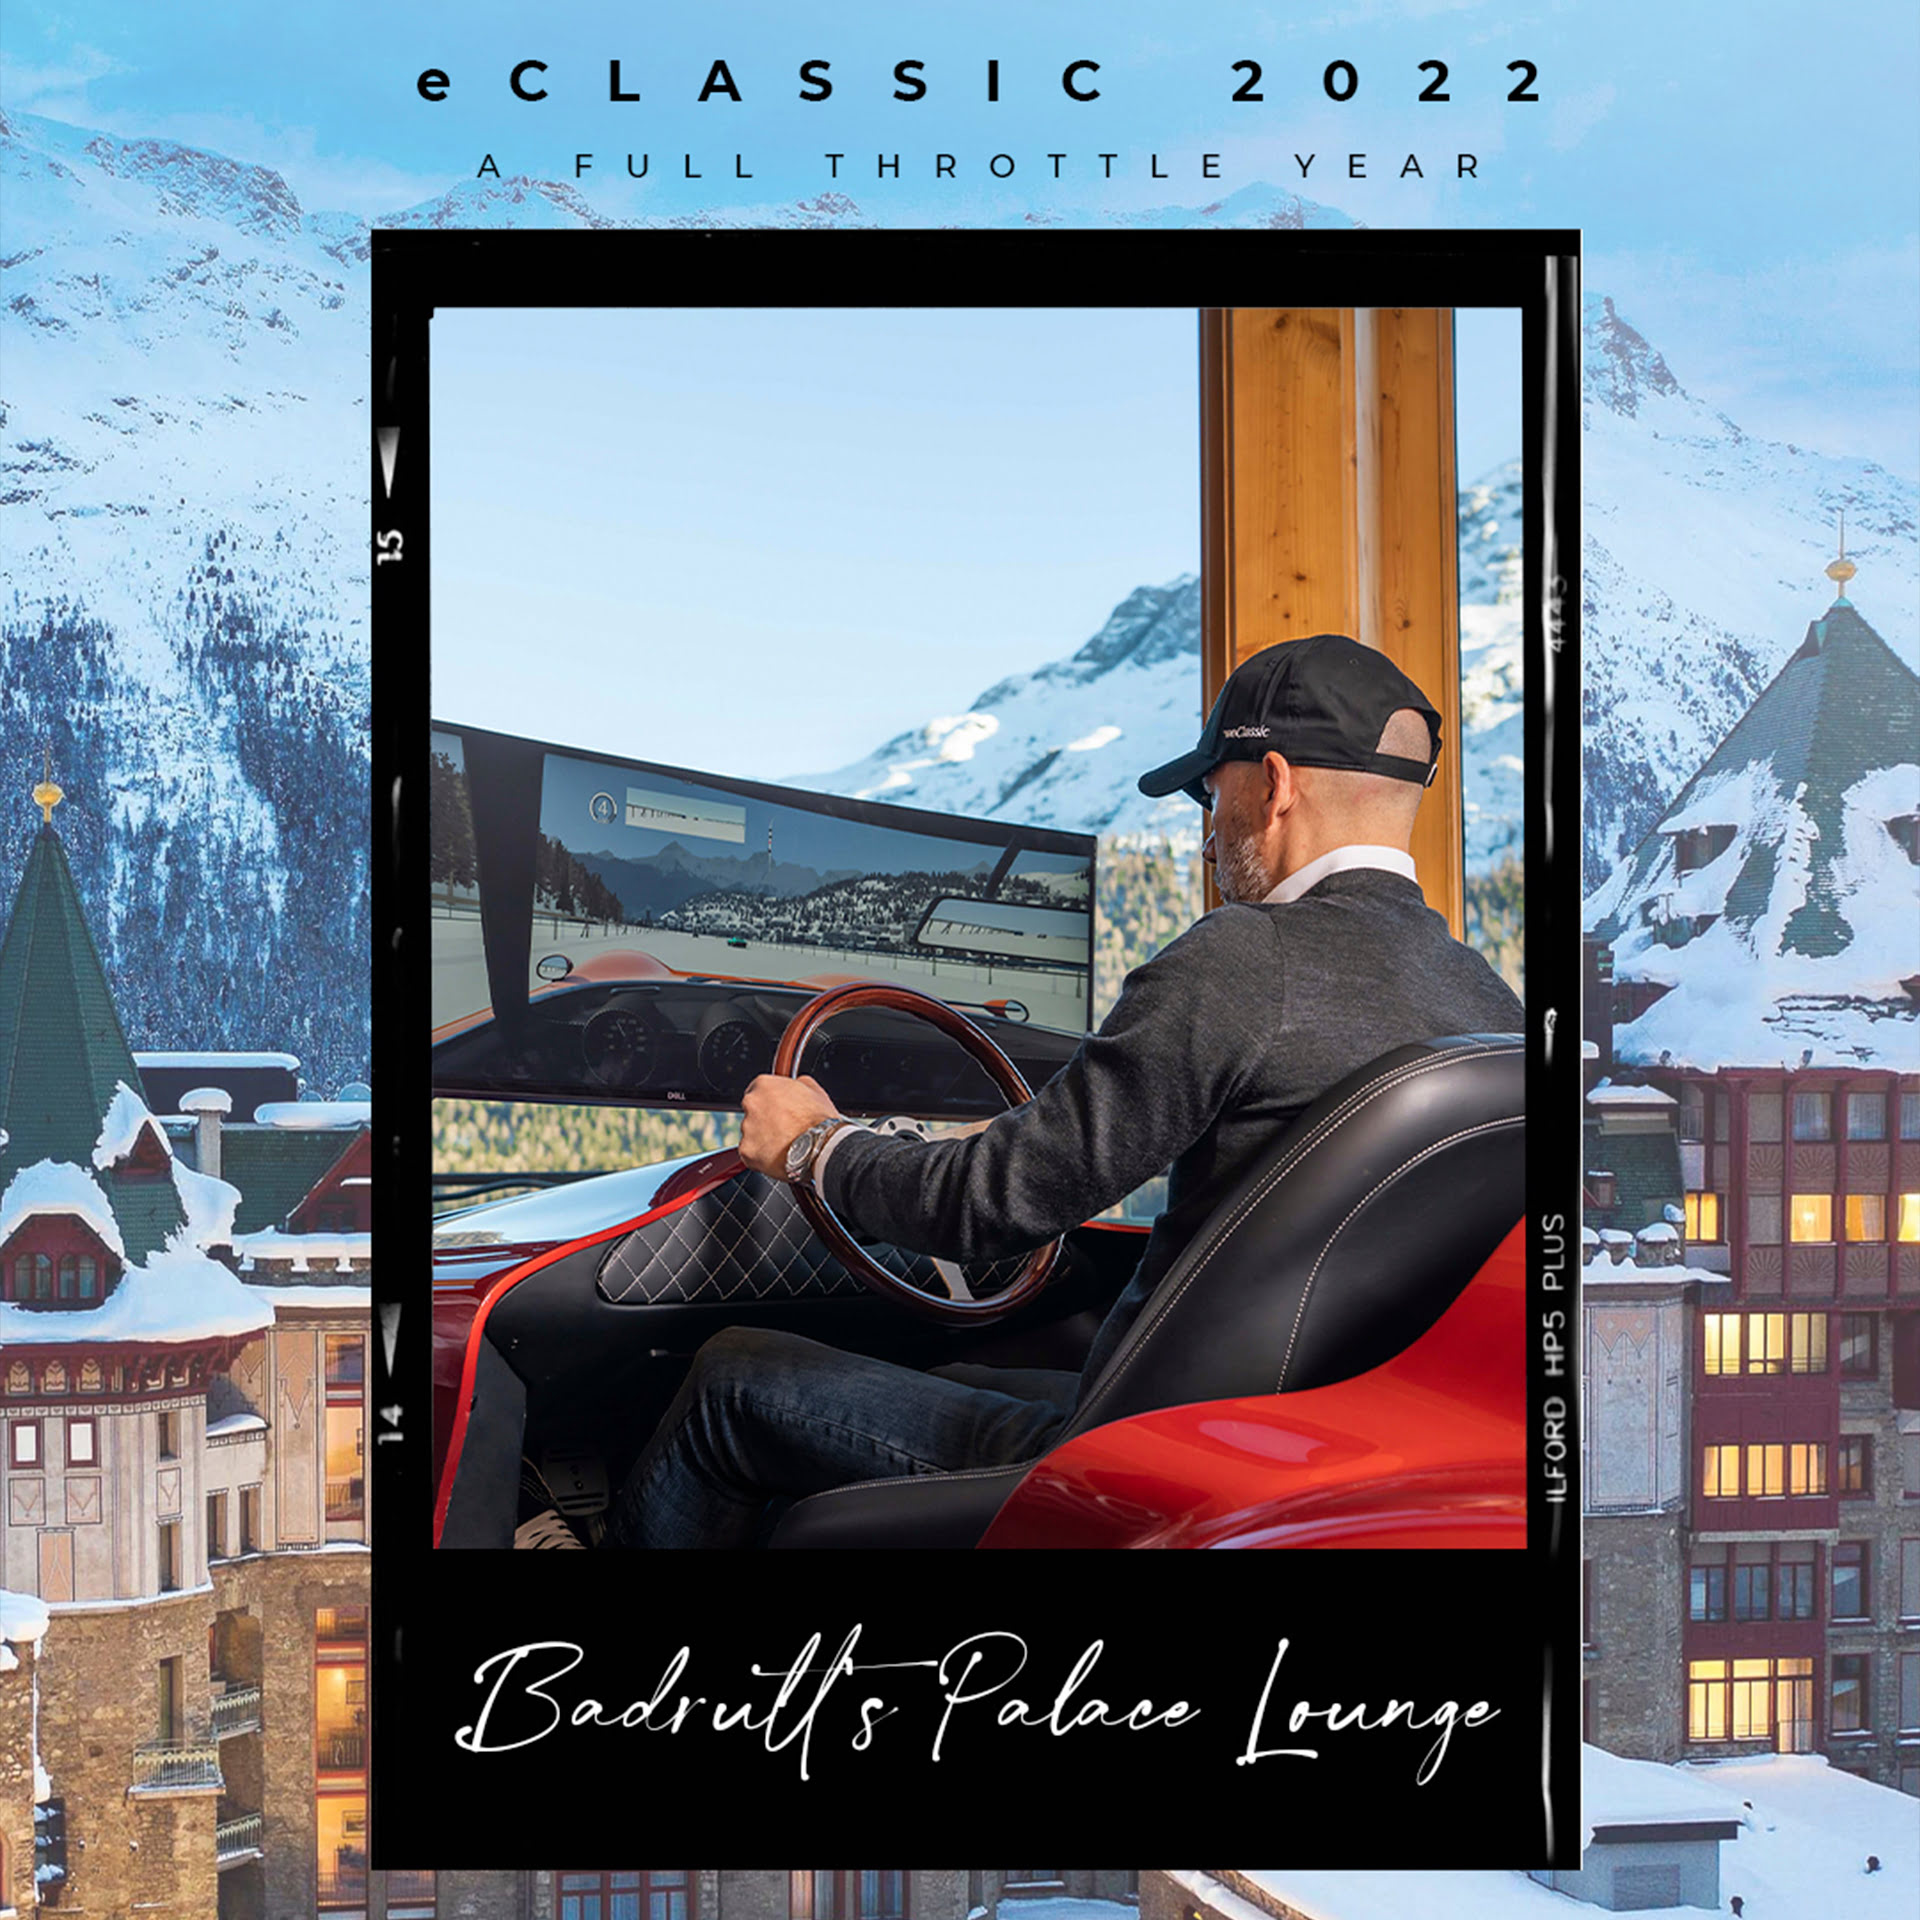 eClassic 2022: a full throttle year Badrutt’s Palace Lounge image